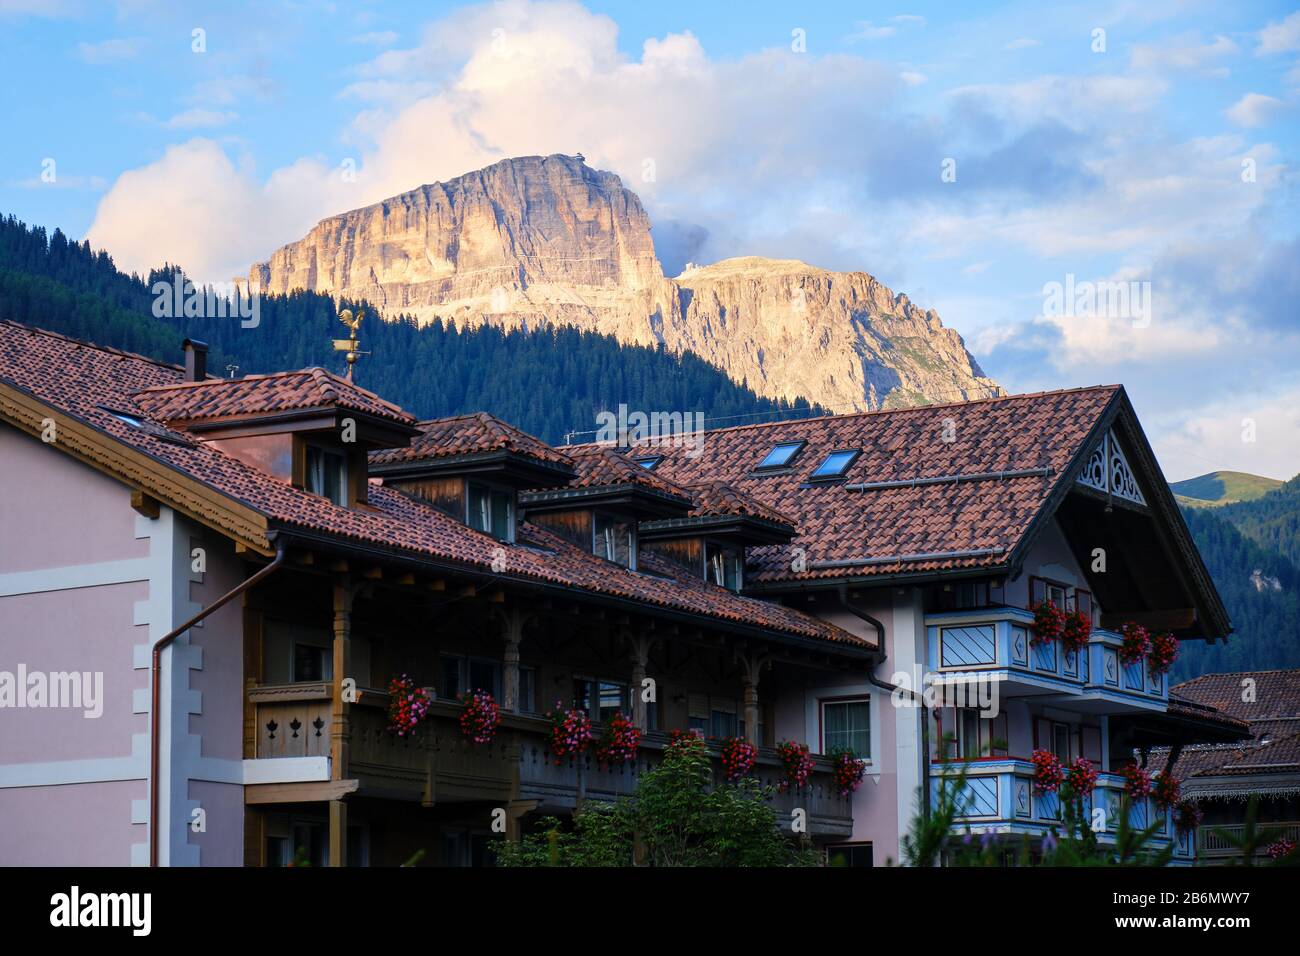 Traditional Italian house in Campitello di Fassa, with Dolomites mountain peaks lit by orange sunset light in the background. Stock Photo